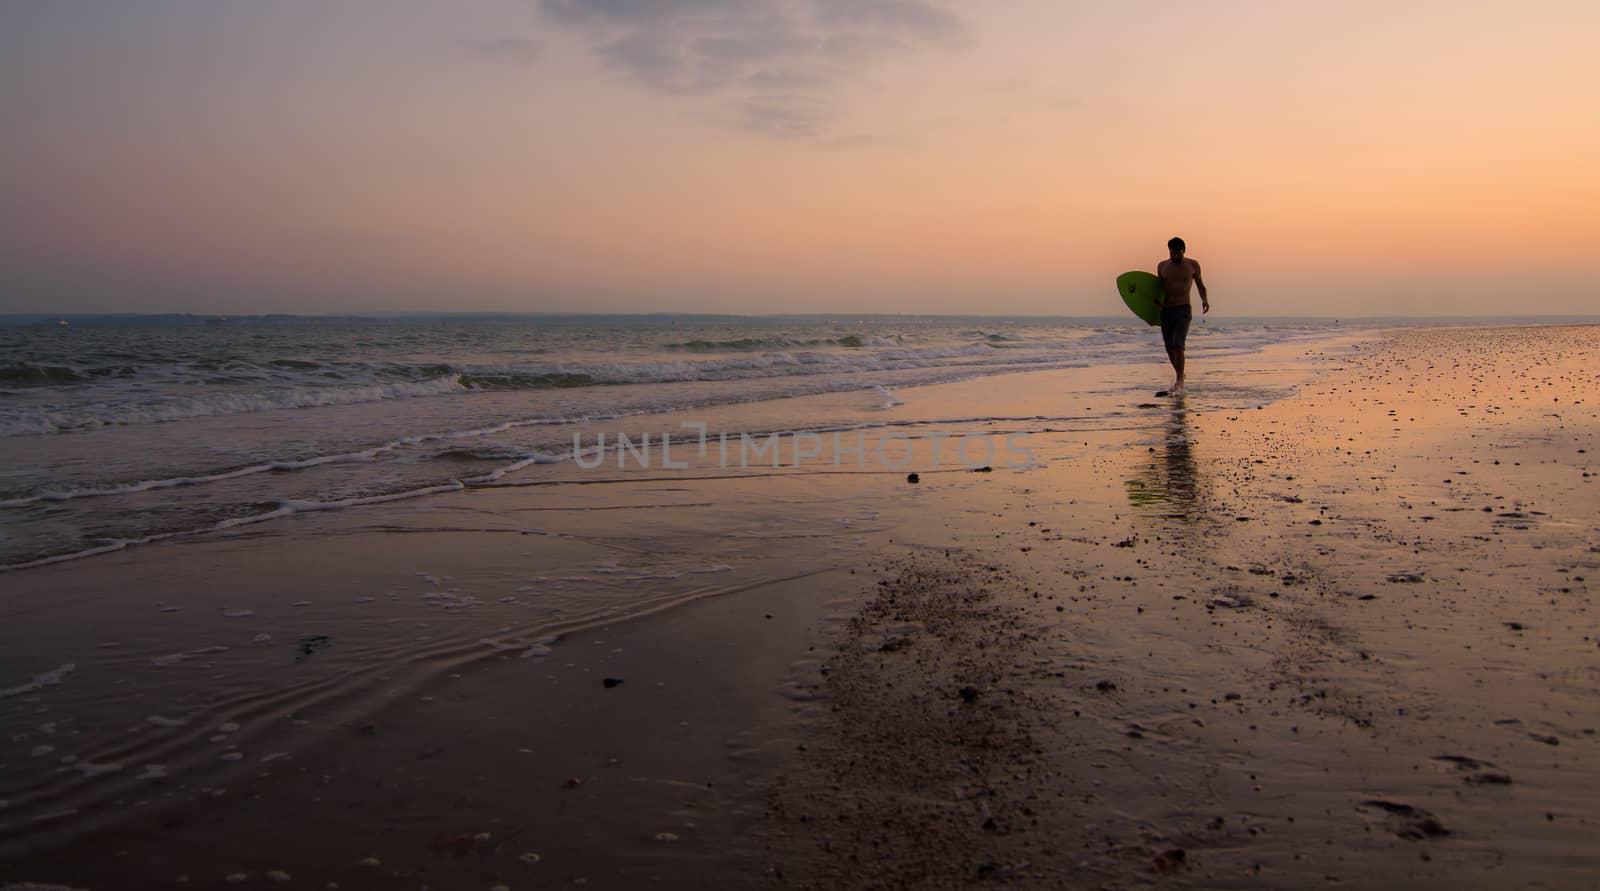 Lone surfer in the evening sun by gary_parker